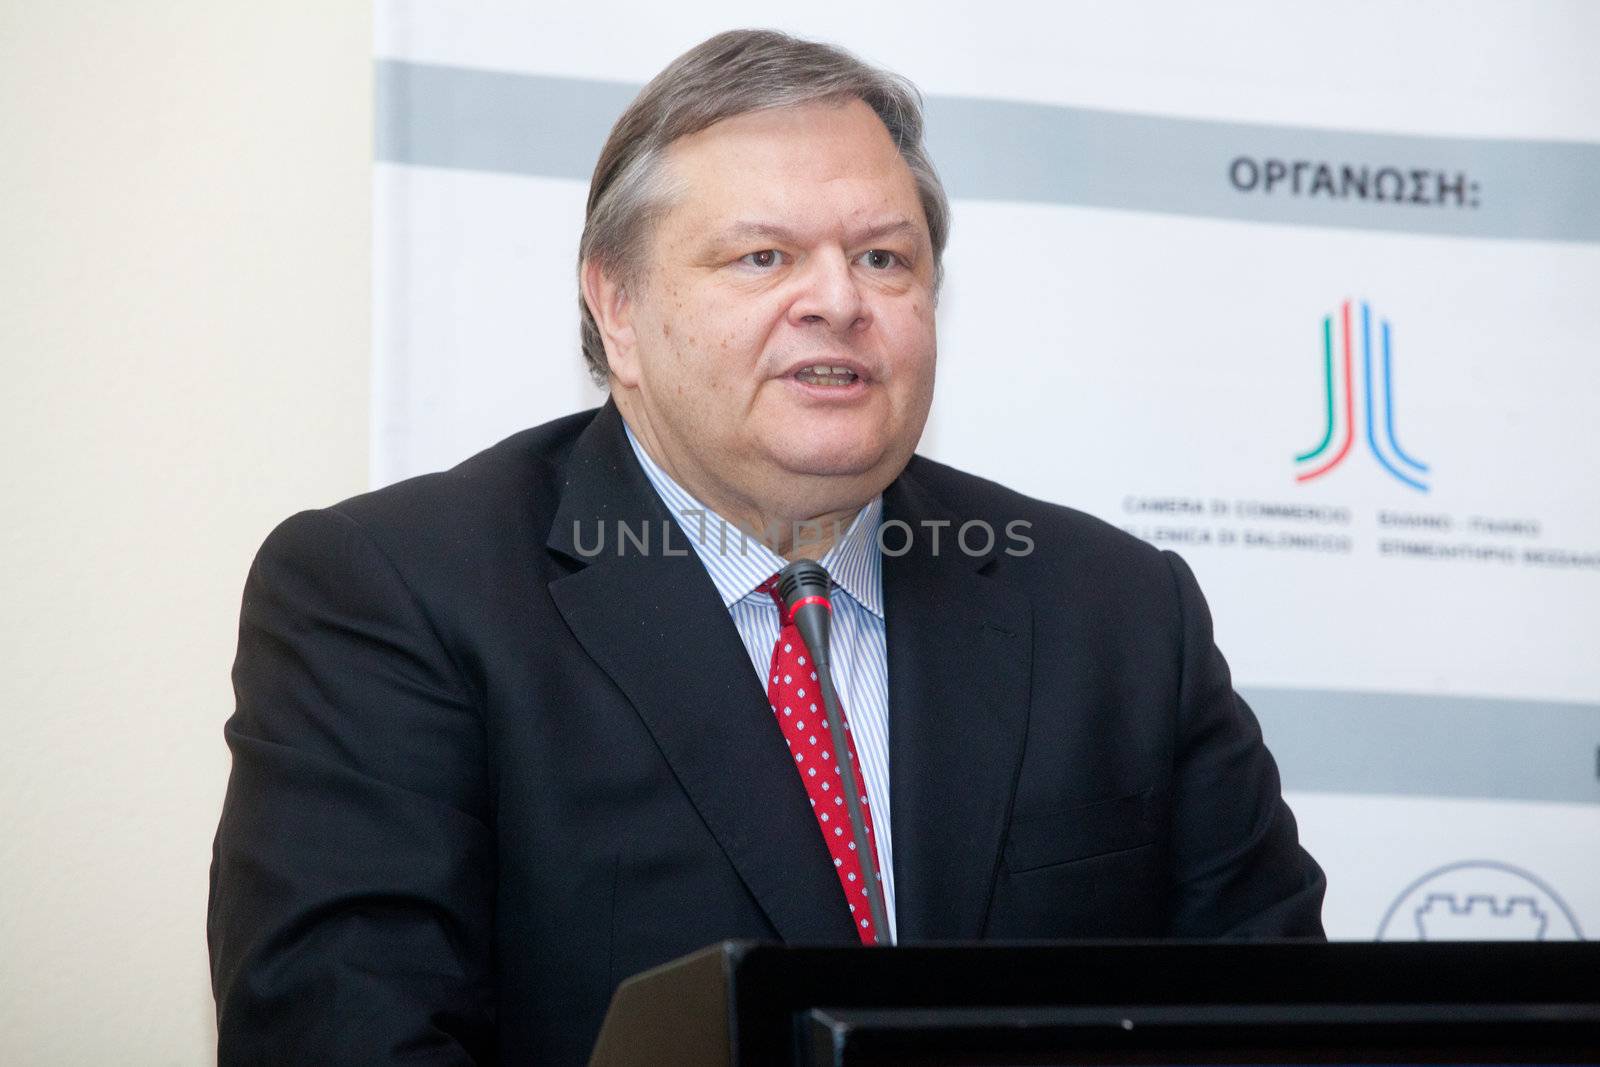 Evaggelos Venizelos, Greek Minister of Finance gives his speech by Portokalis